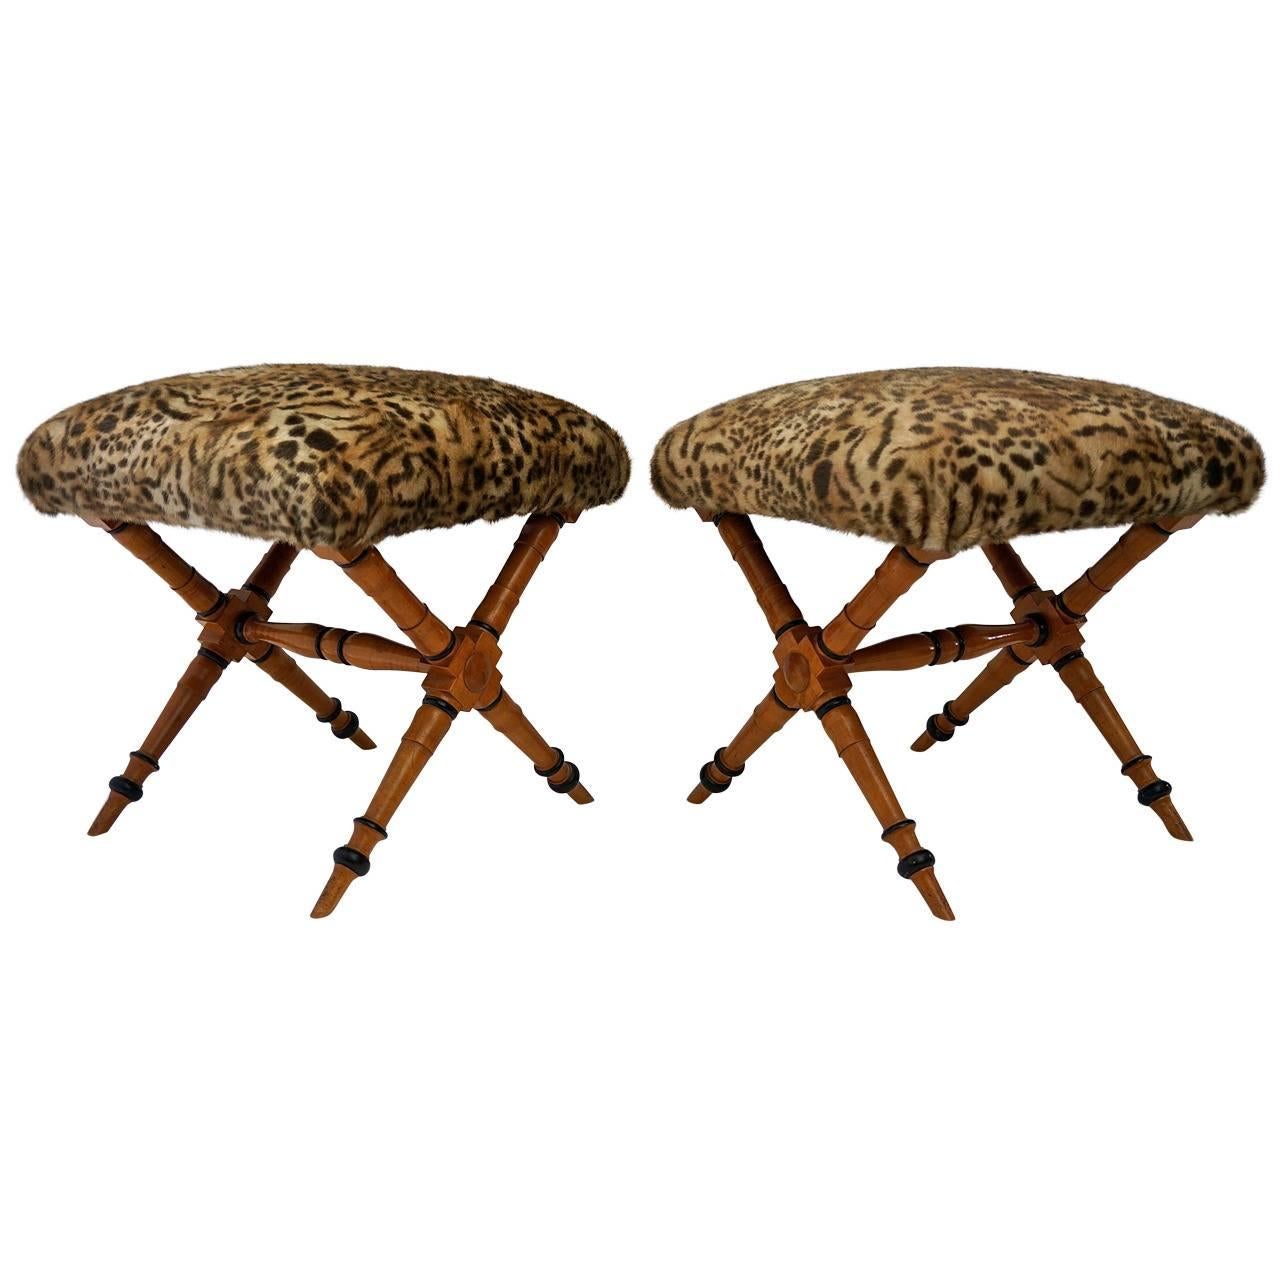 Pair of Biedermeier Style X-Stools with Faux Fur Upholstery For Sale